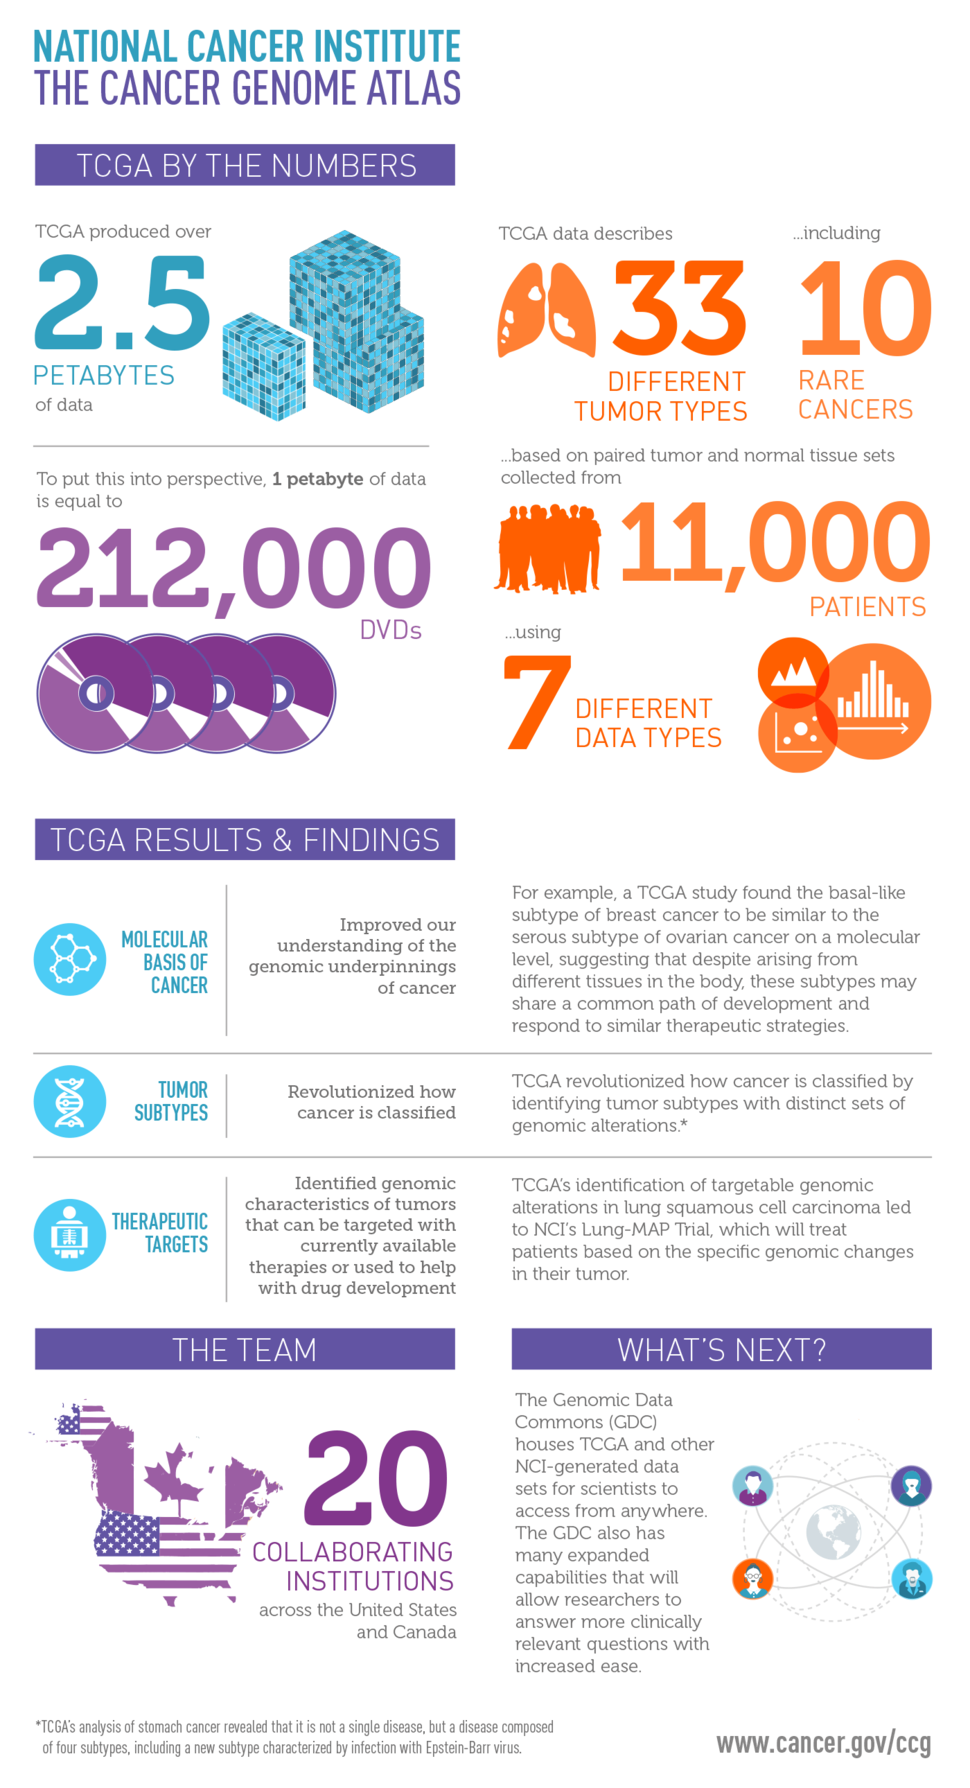 TCGA produced over 2.5 TB of data. To put this into perspective, one petabyte of data is equal to 212,000 DVDs. TCGA data describes 33 different tumor types including 10 rare cancers based on paired tumor and normal tissue sets collected from 11,000 patients using seven different data types. TCGA results and findings. Improved our understanding of the genomic underpinnings of cancer. For example, a TCGA study found the basil-like subtype of breast cancer to be similar to the serous subtype of ovarian cancer